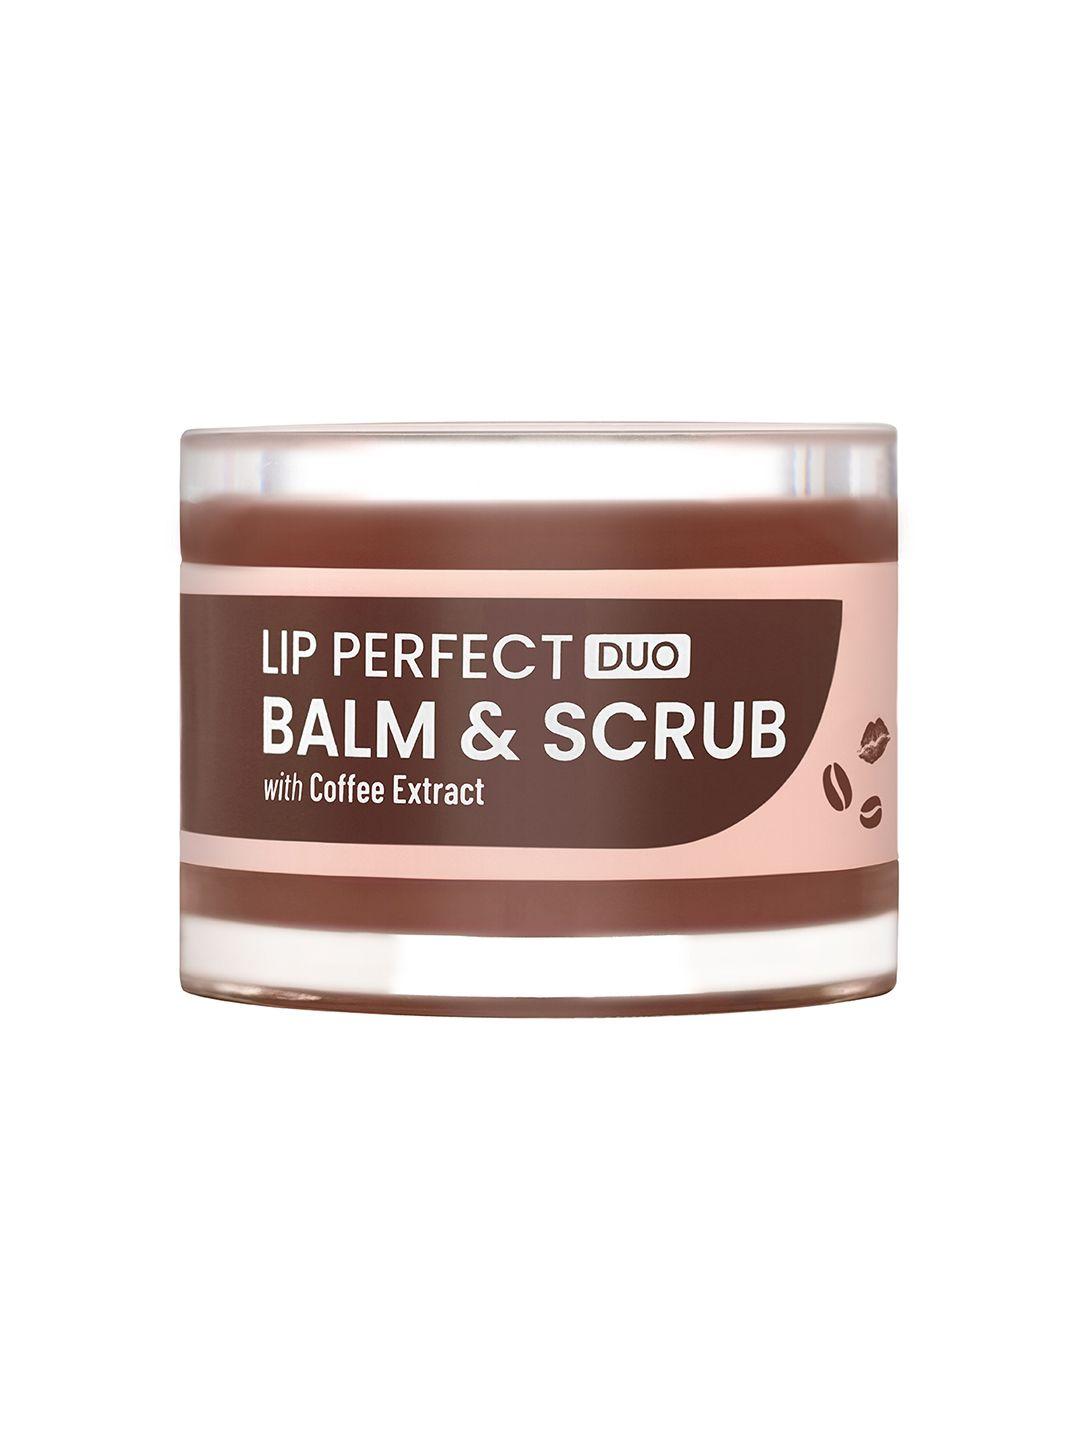 swiss beauty lip perfect duo balm & scrub with coffee extract - 7 g